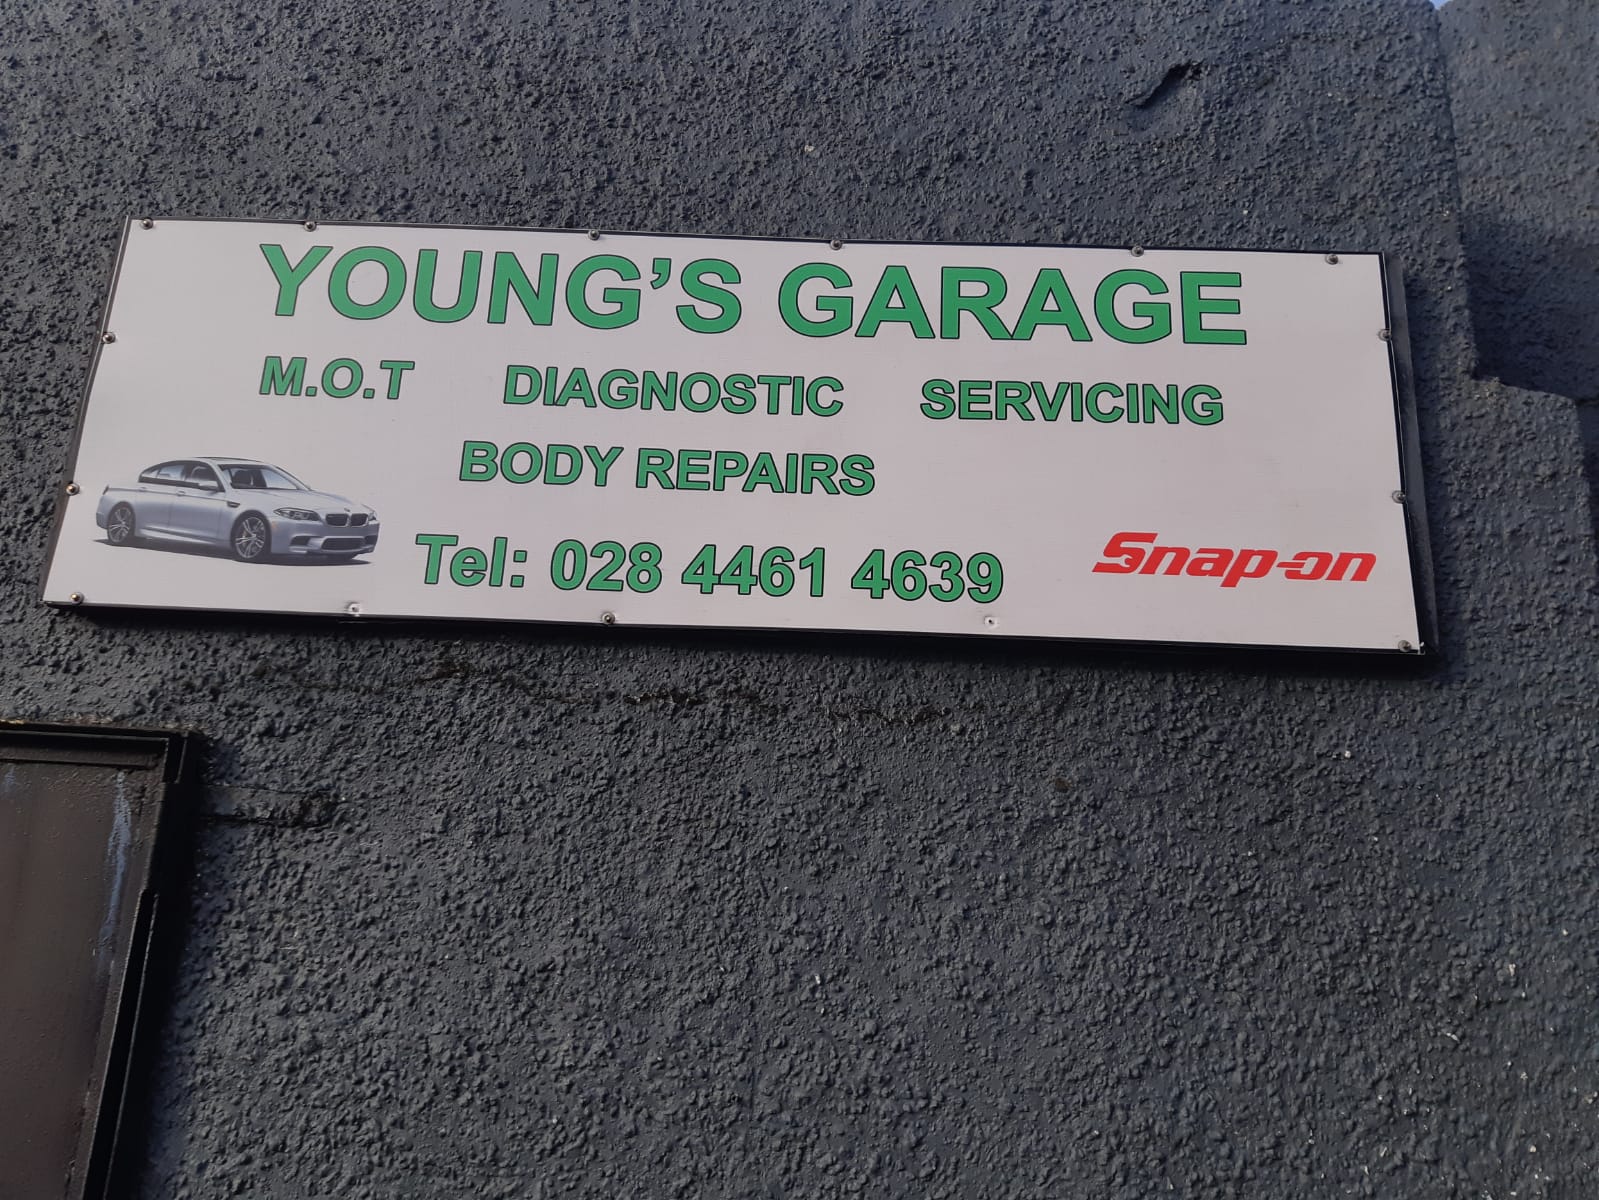 Young’s Garage